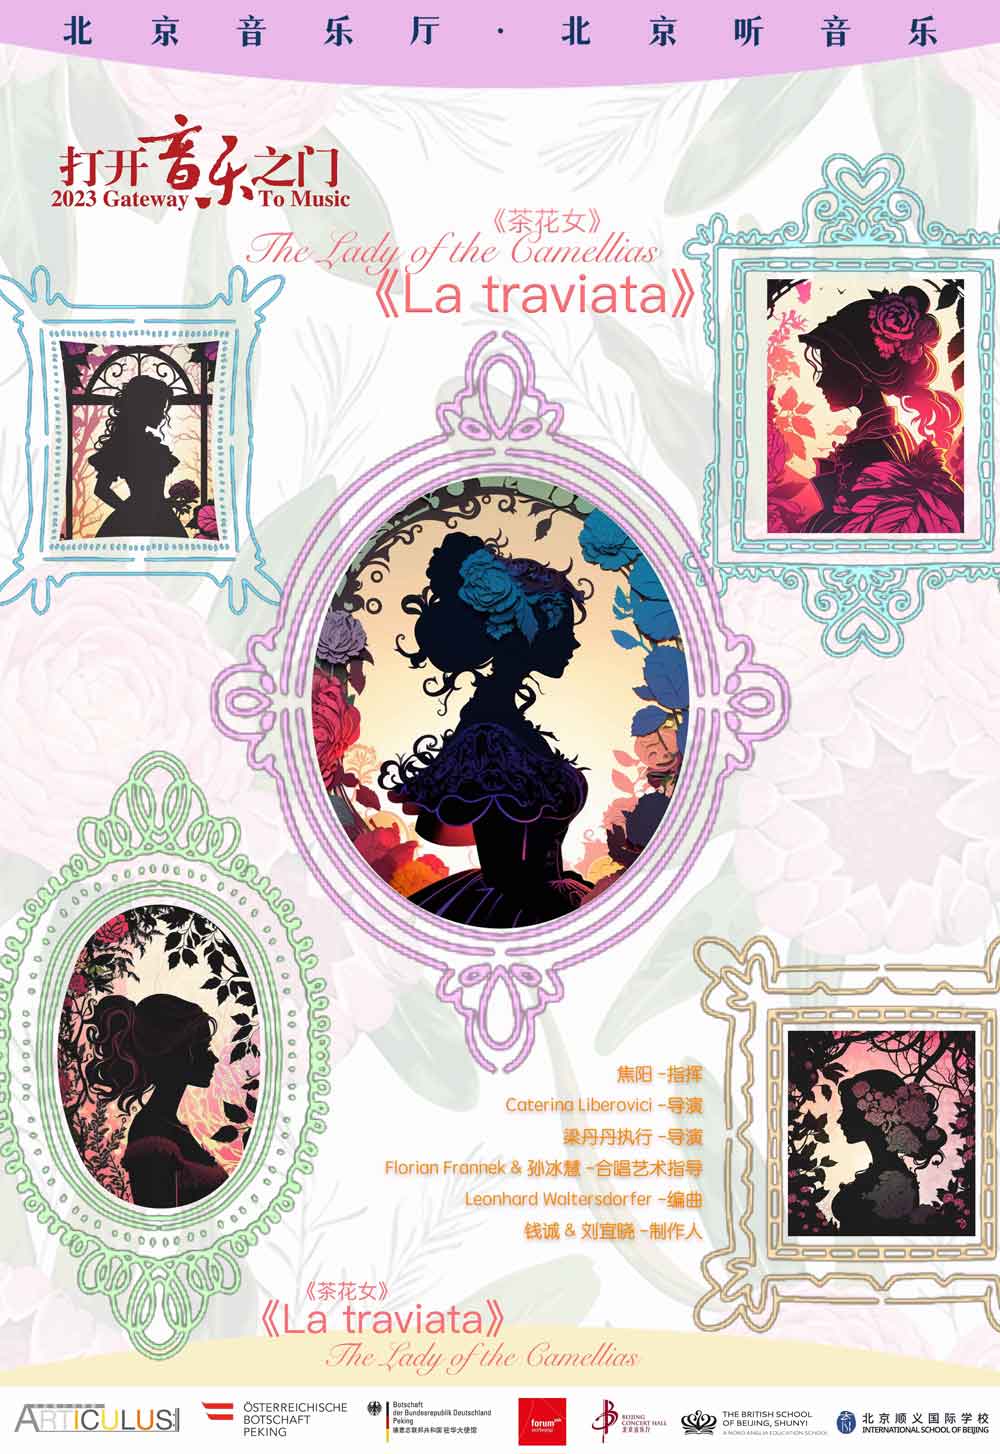 Get your tickets for La Traviata - Get your tickets for La Traviata